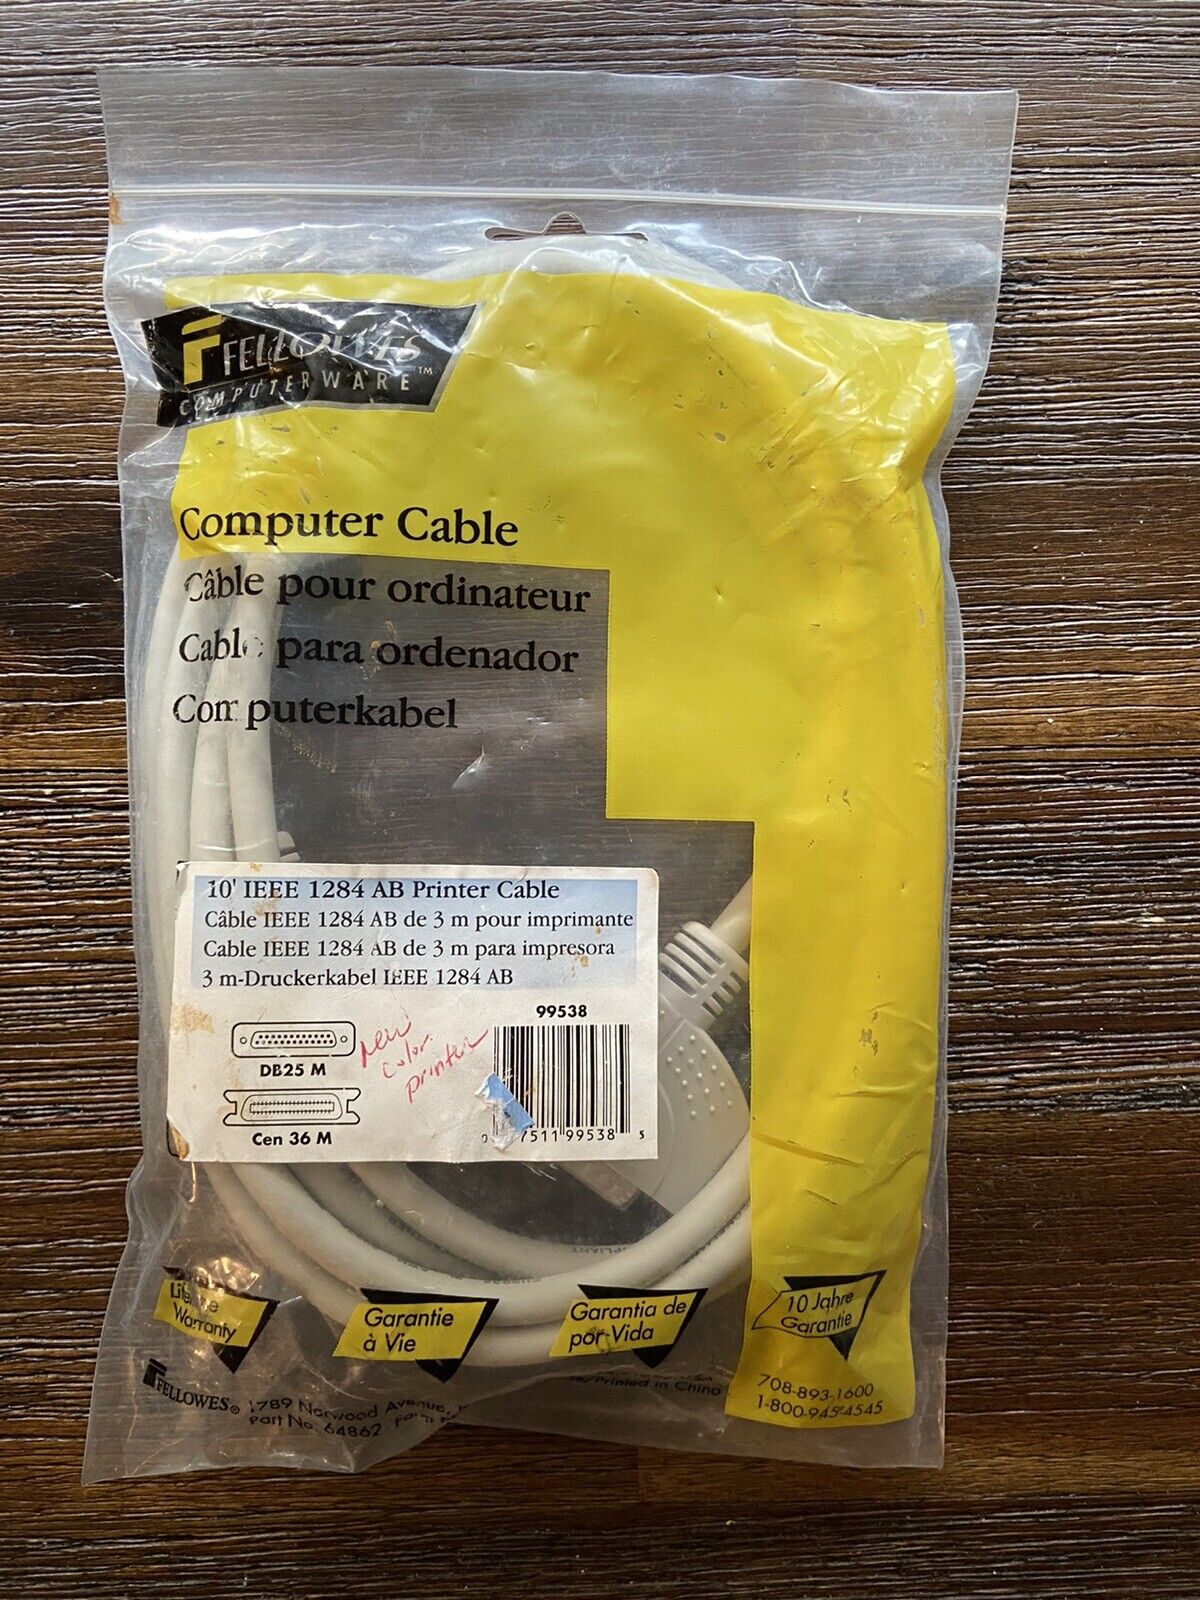 Fellowes Printer Computer Cable IEEE 1284 AB 10' Foot DB25M to Cen 36M NEW